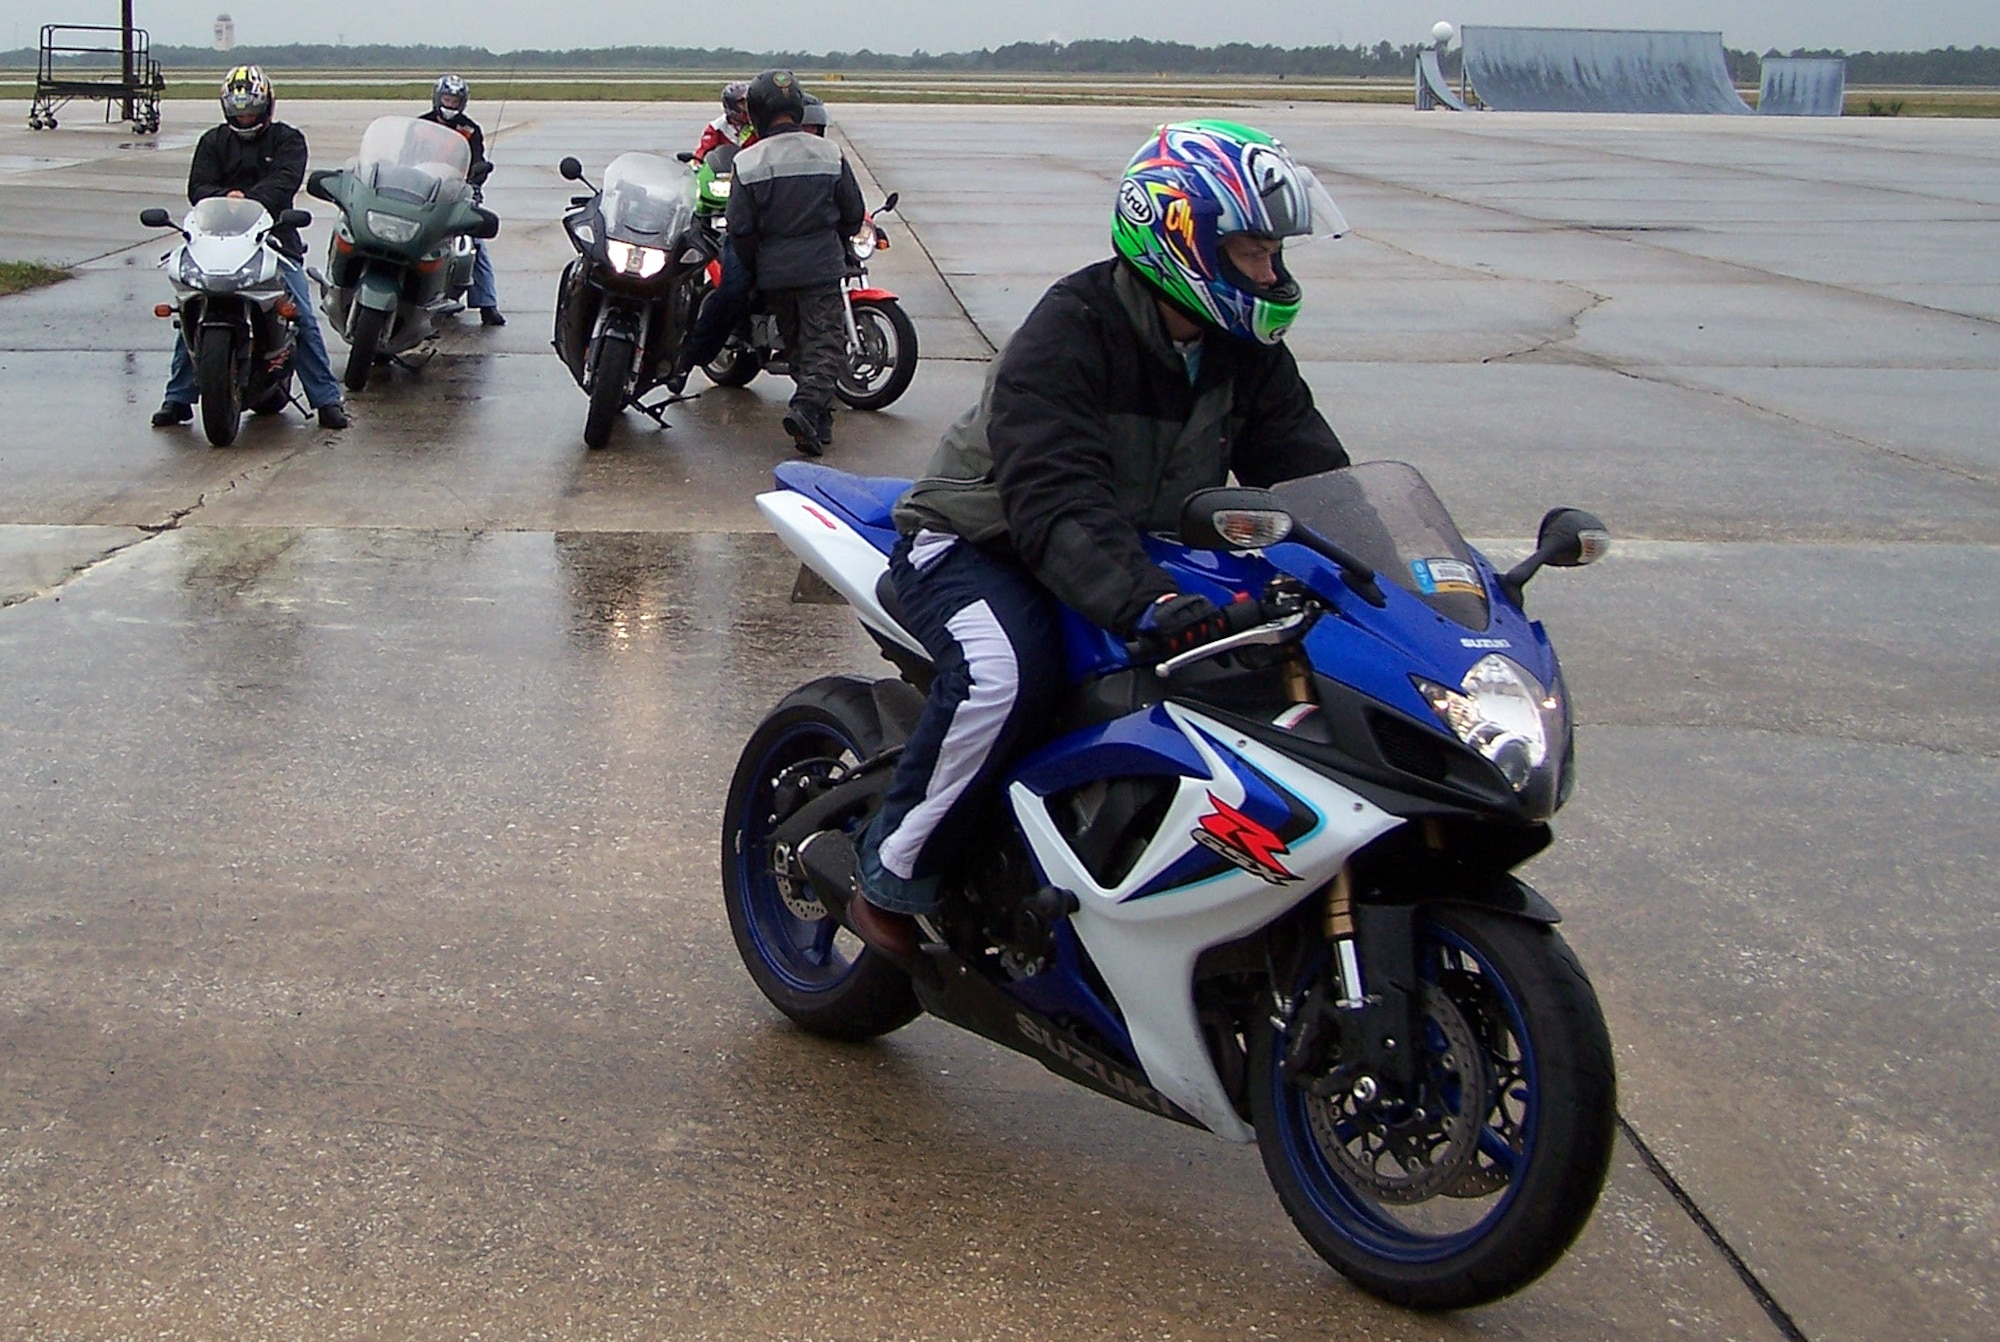 Airmen ride their motocycles while a video crew shoot footage for a new motorcycle safety DVD Jan. 24 at MacDill Air Force Base, Fla. The video will be a part of a safety DVD used by the military and is set to release in the spring. (U.S. Air Force photo)